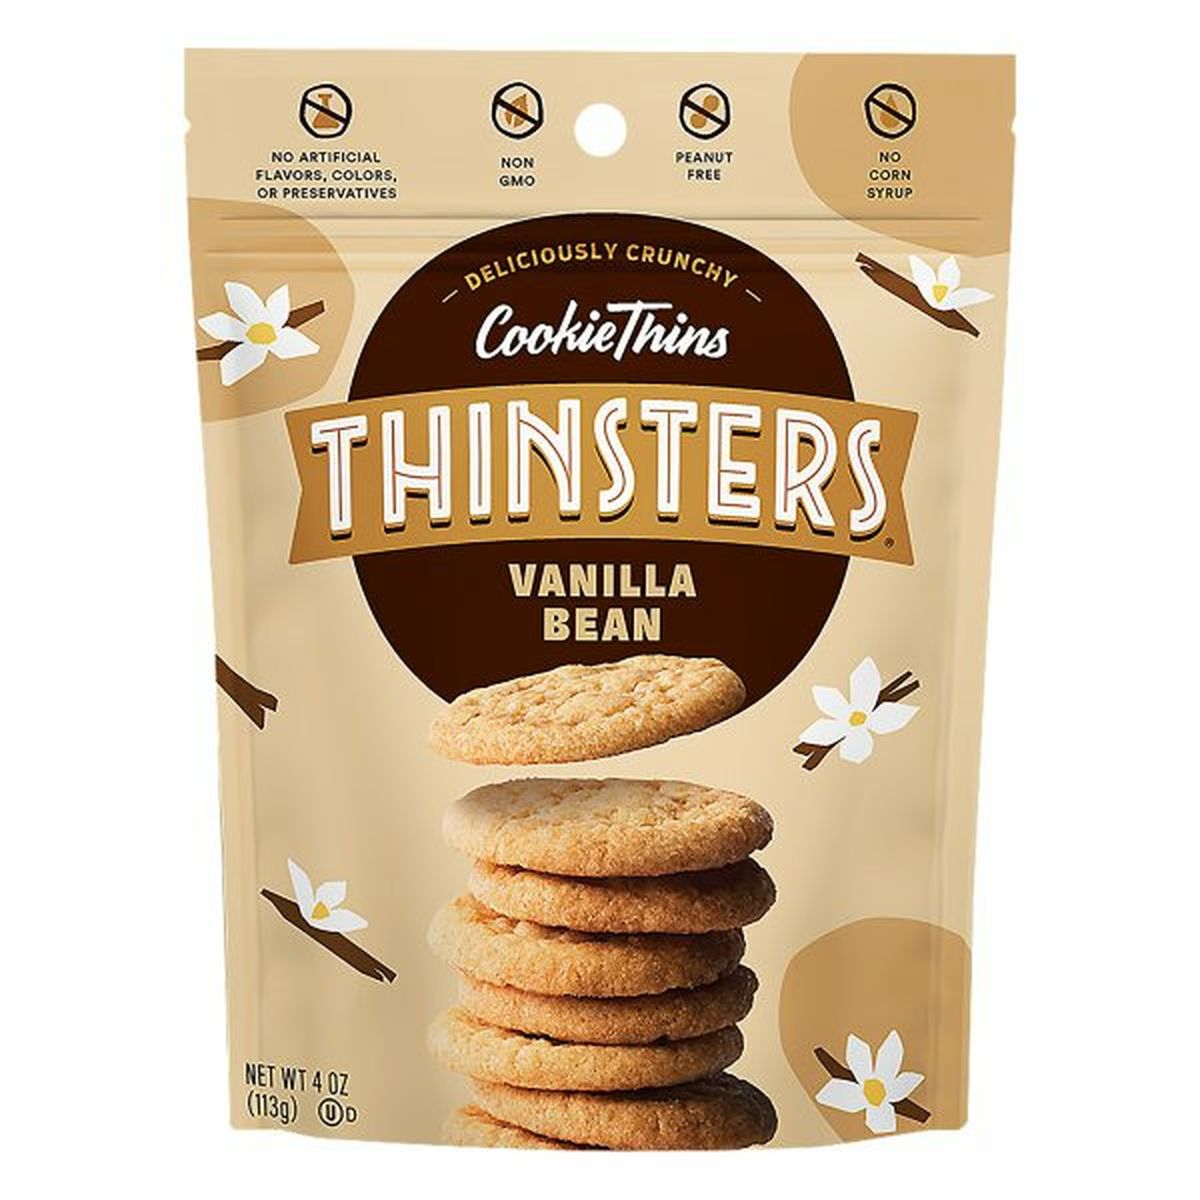 Calories in Thinsters Cookie Thins, Vanilla Bean